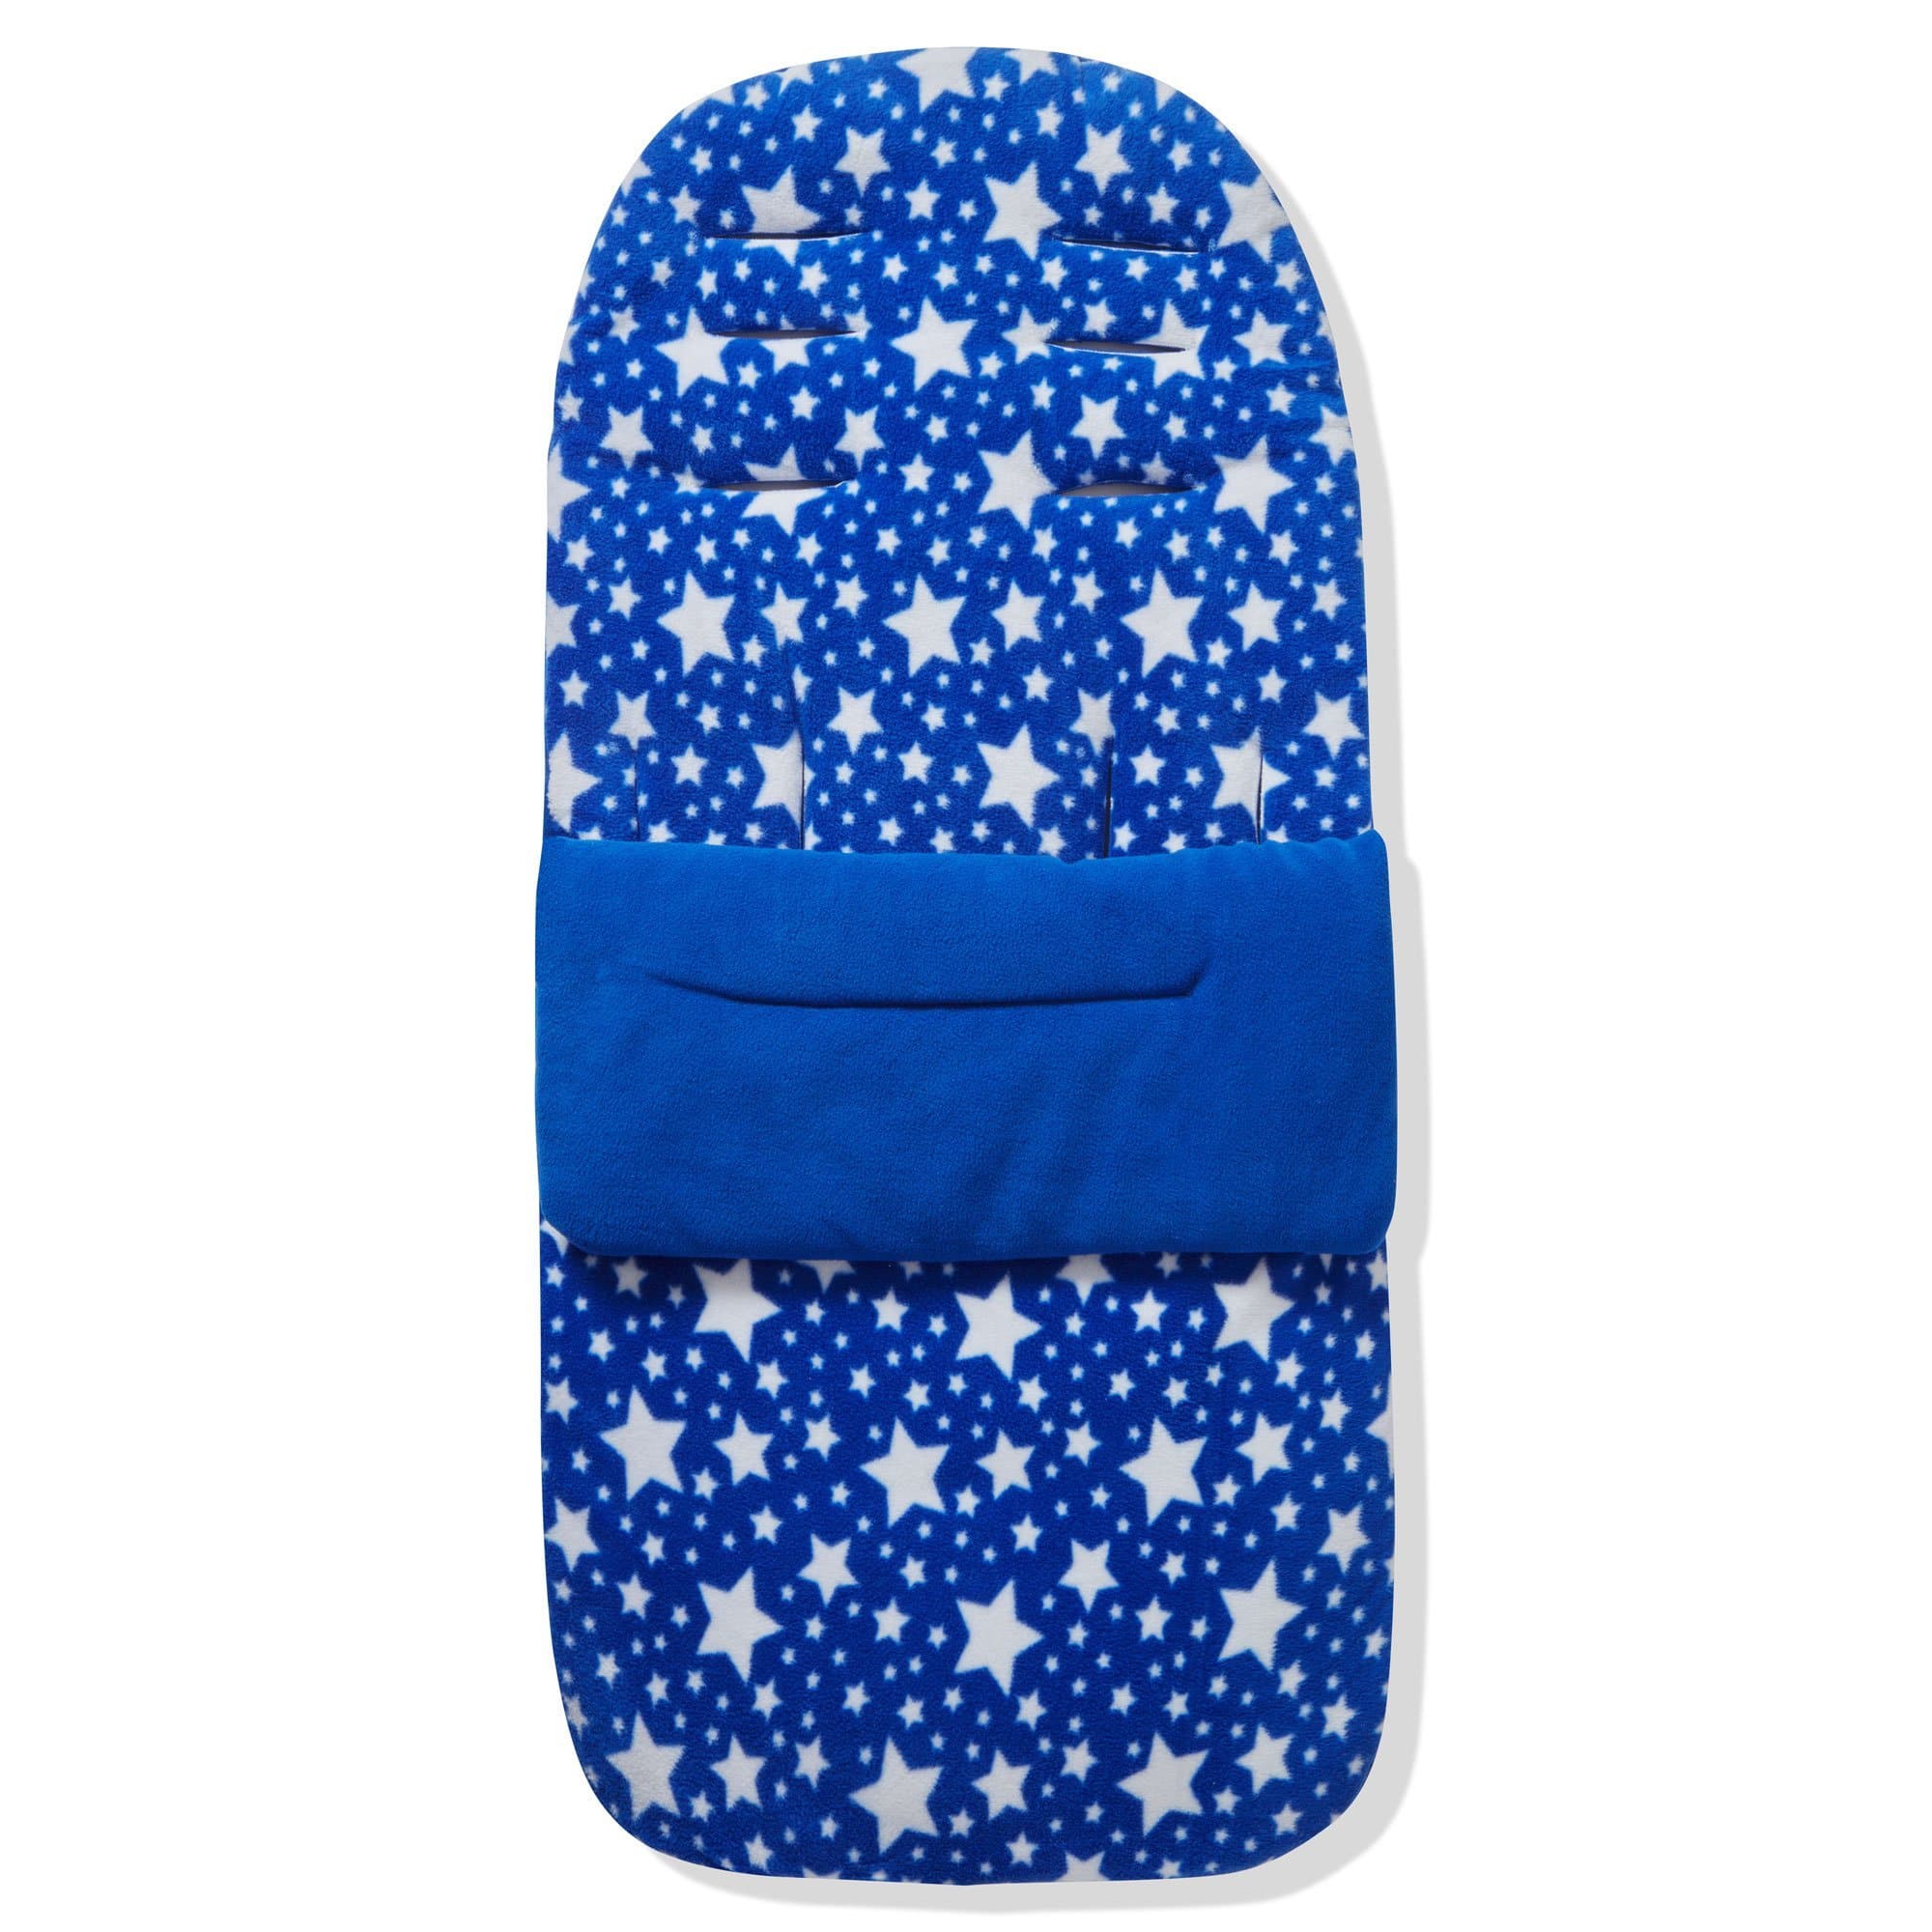 Fleece Footmuff / Cosy Toes Compatible with BabyDan - For Your Little One